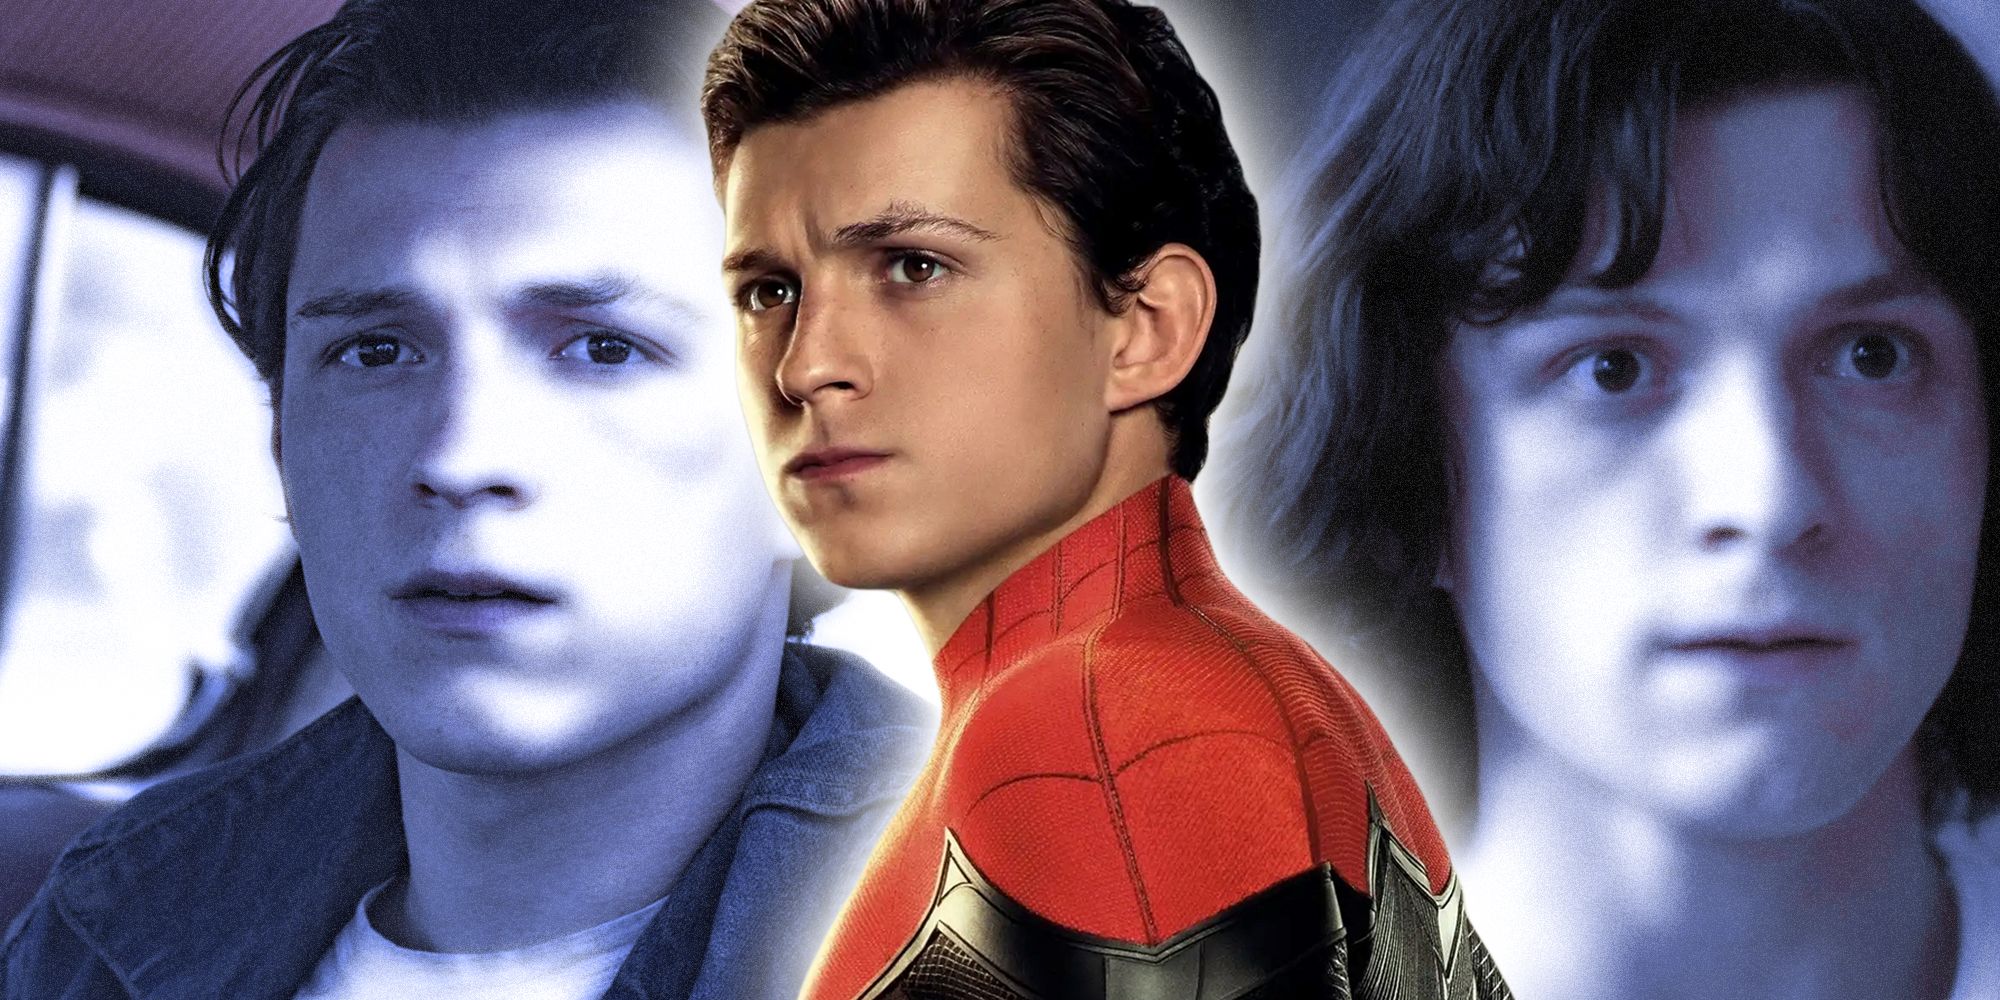 Tom Holland as Spider-Man in the MCU overlaid over images of him in other movies